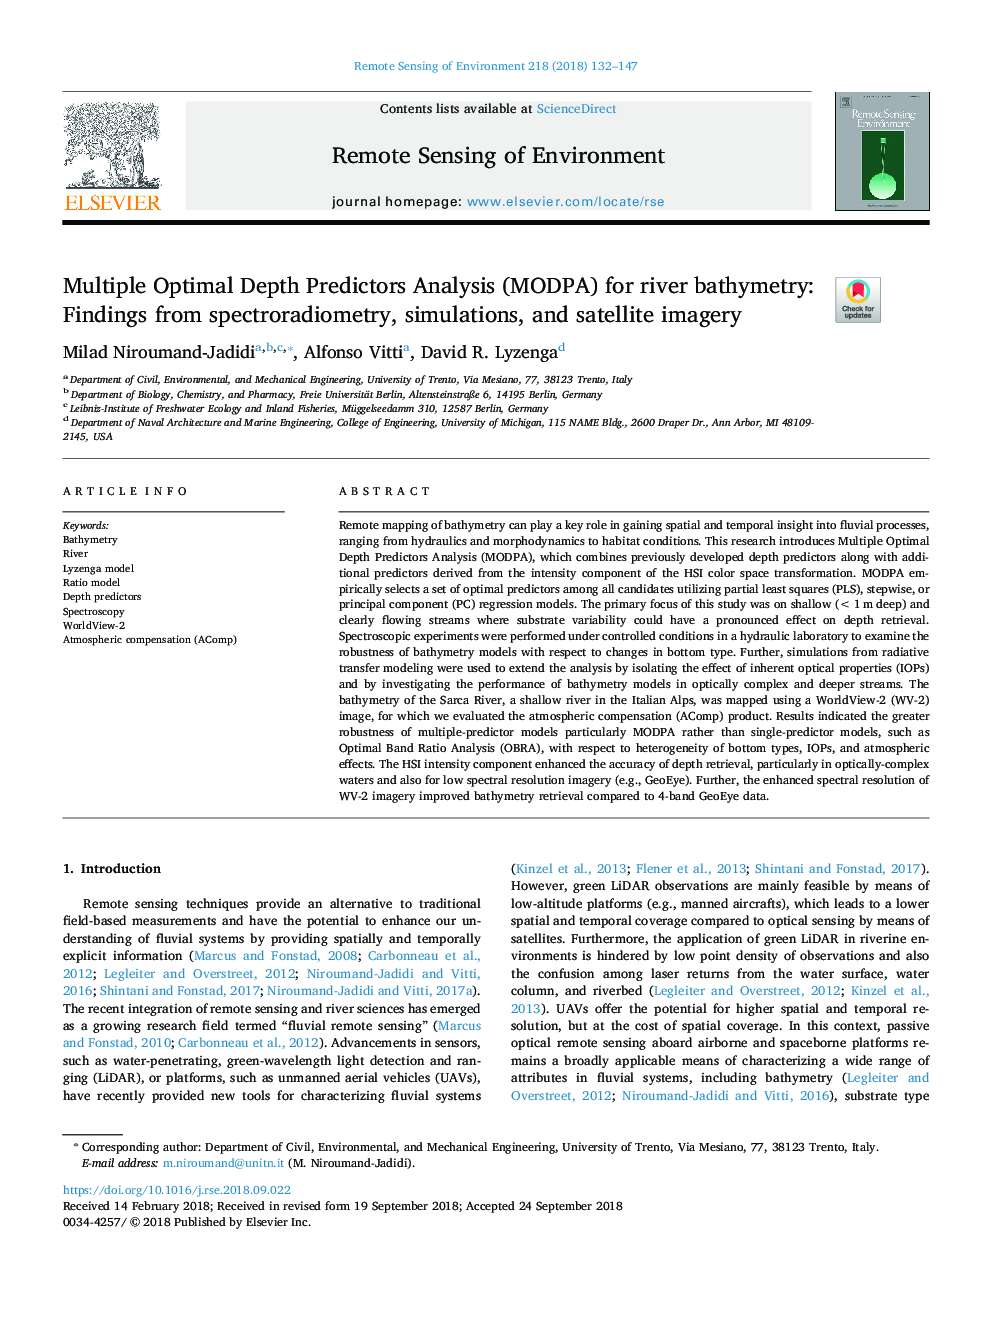 Multiple Optimal Depth Predictors Analysis (MODPA) for river bathymetry: Findings from spectroradiometry, simulations, and satellite imagery